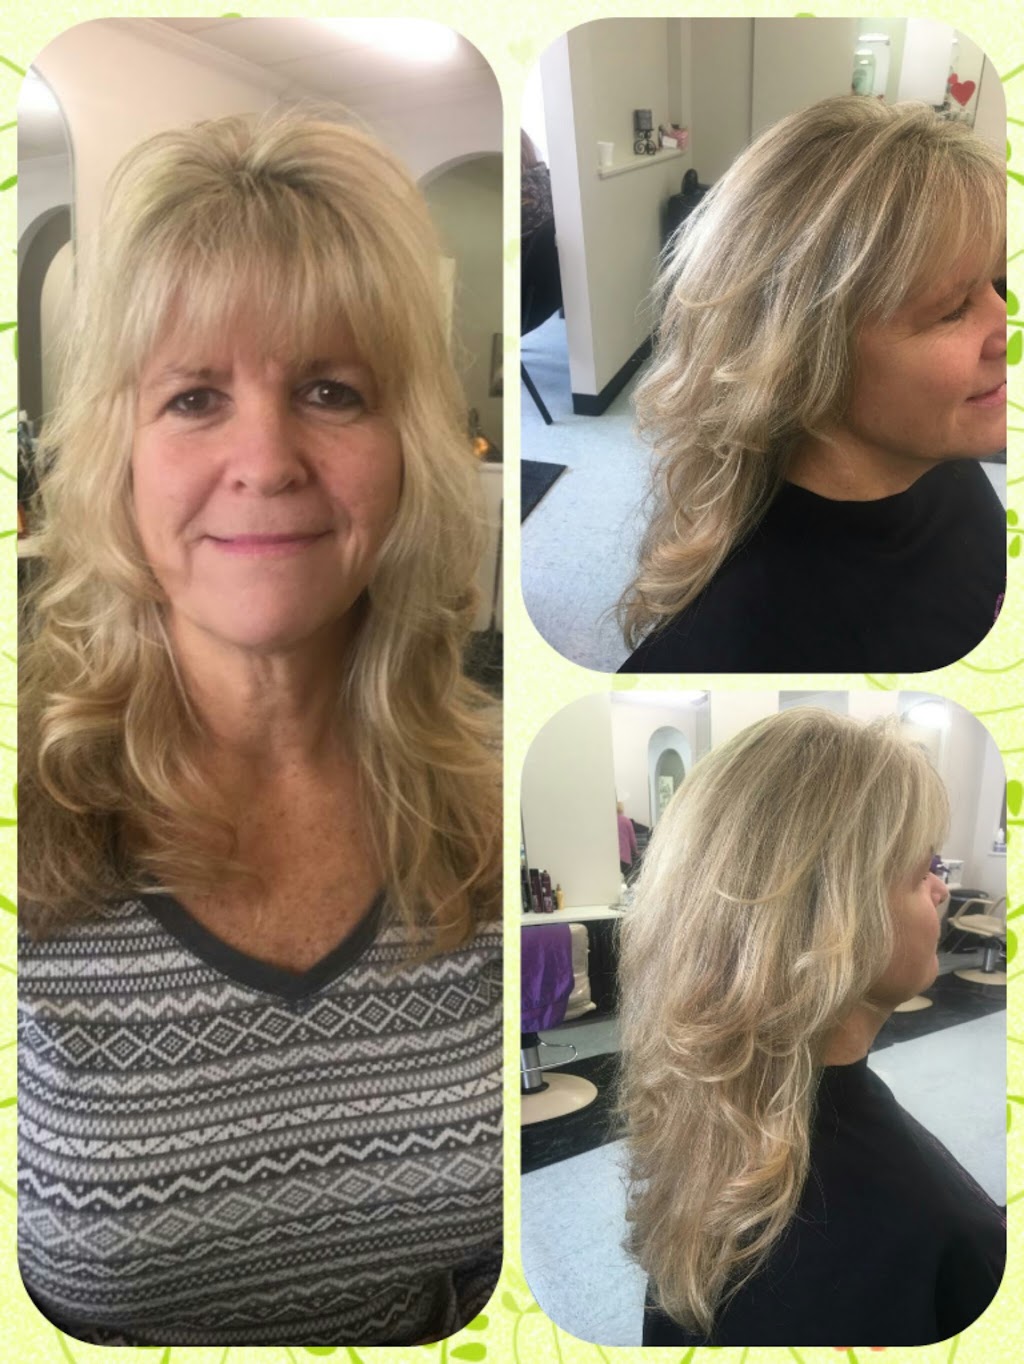 The Mane Difference Hair Design | 500 W Aurora Rd #120, Northfield, OH 44067 | Phone: (330) 468-1441